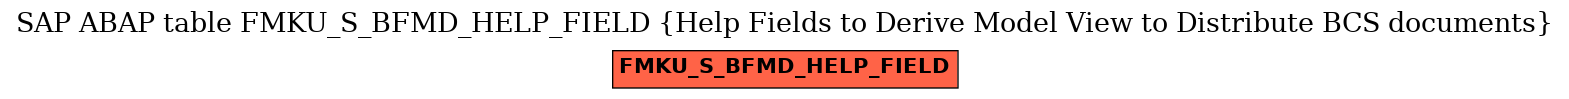 E-R Diagram for table FMKU_S_BFMD_HELP_FIELD (Help Fields to Derive Model View to Distribute BCS documents)